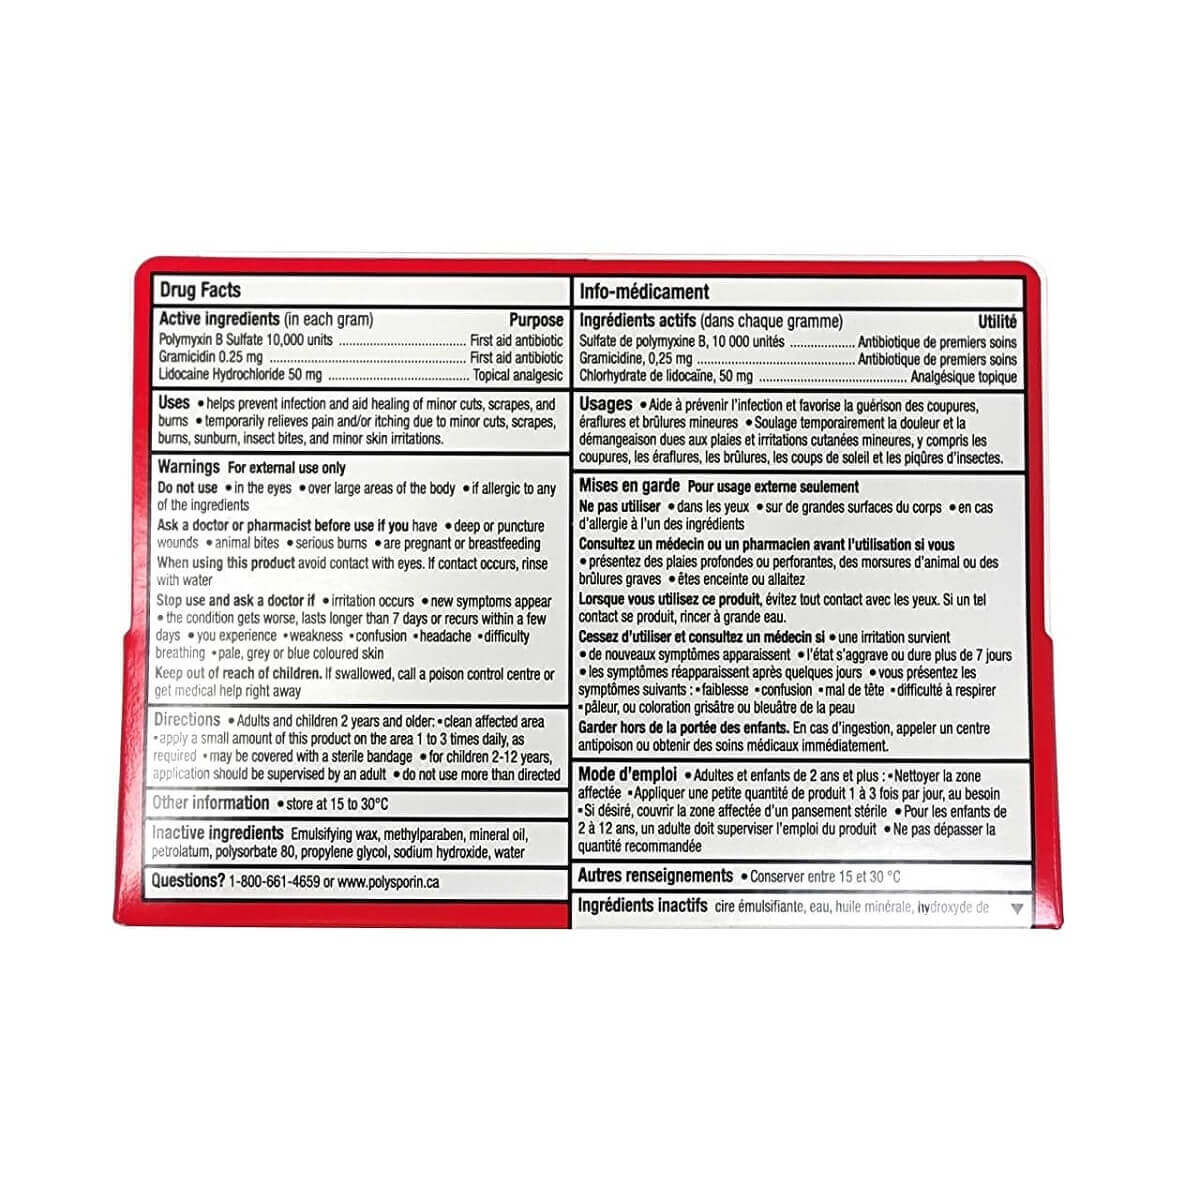 Ingredients, uses, warnings, directions for Polysporin Cream Pain Relief and 2 Antibiotics (30 grams)